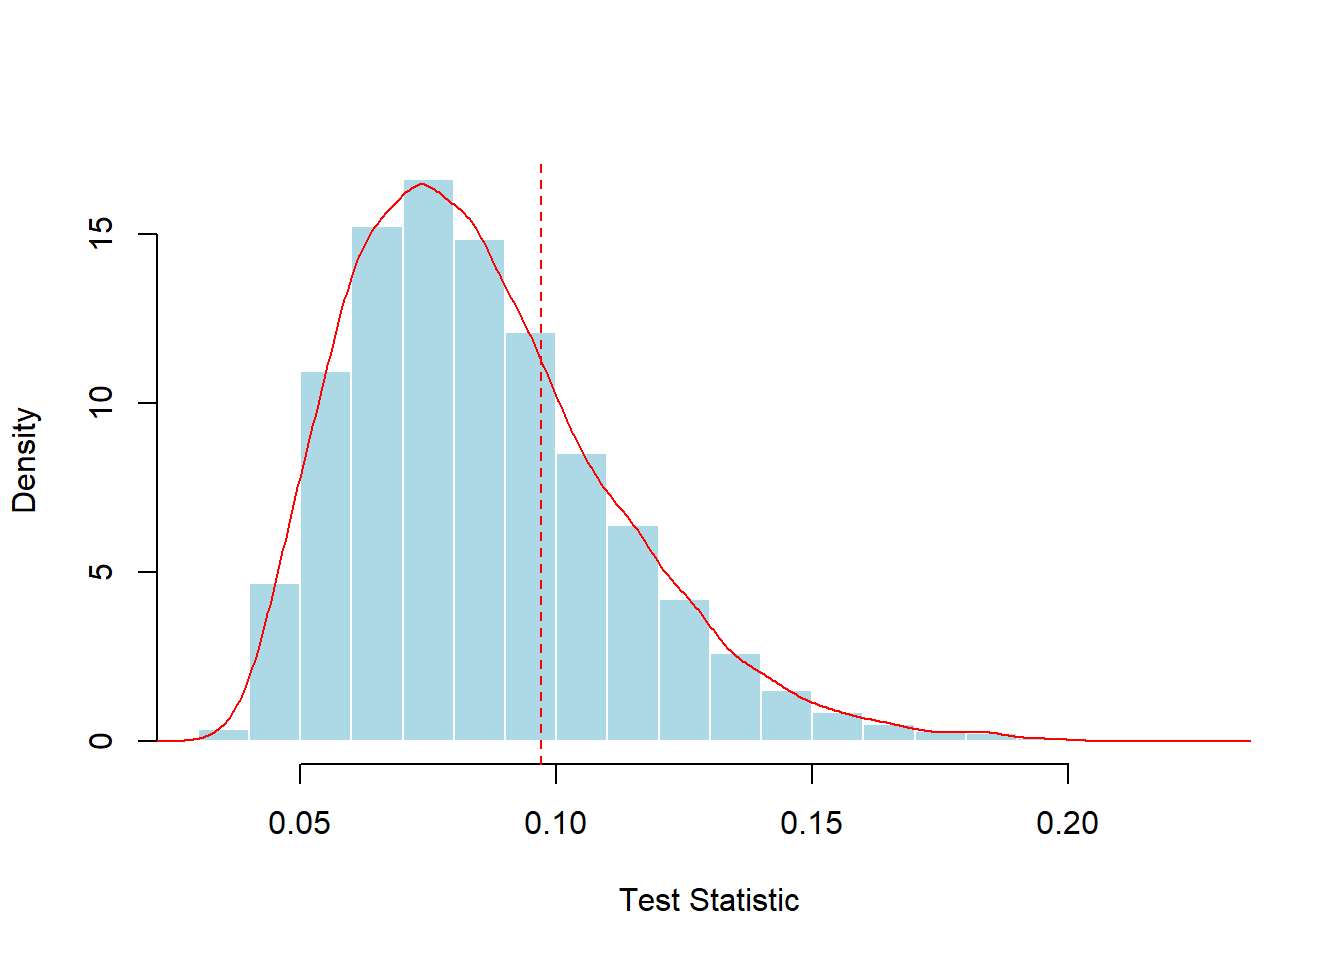 Simulated Distribution of the Kolmogorov-Smirnov Test Statistic. The vertical red dashed line marks the test statistic for the sample of 100.